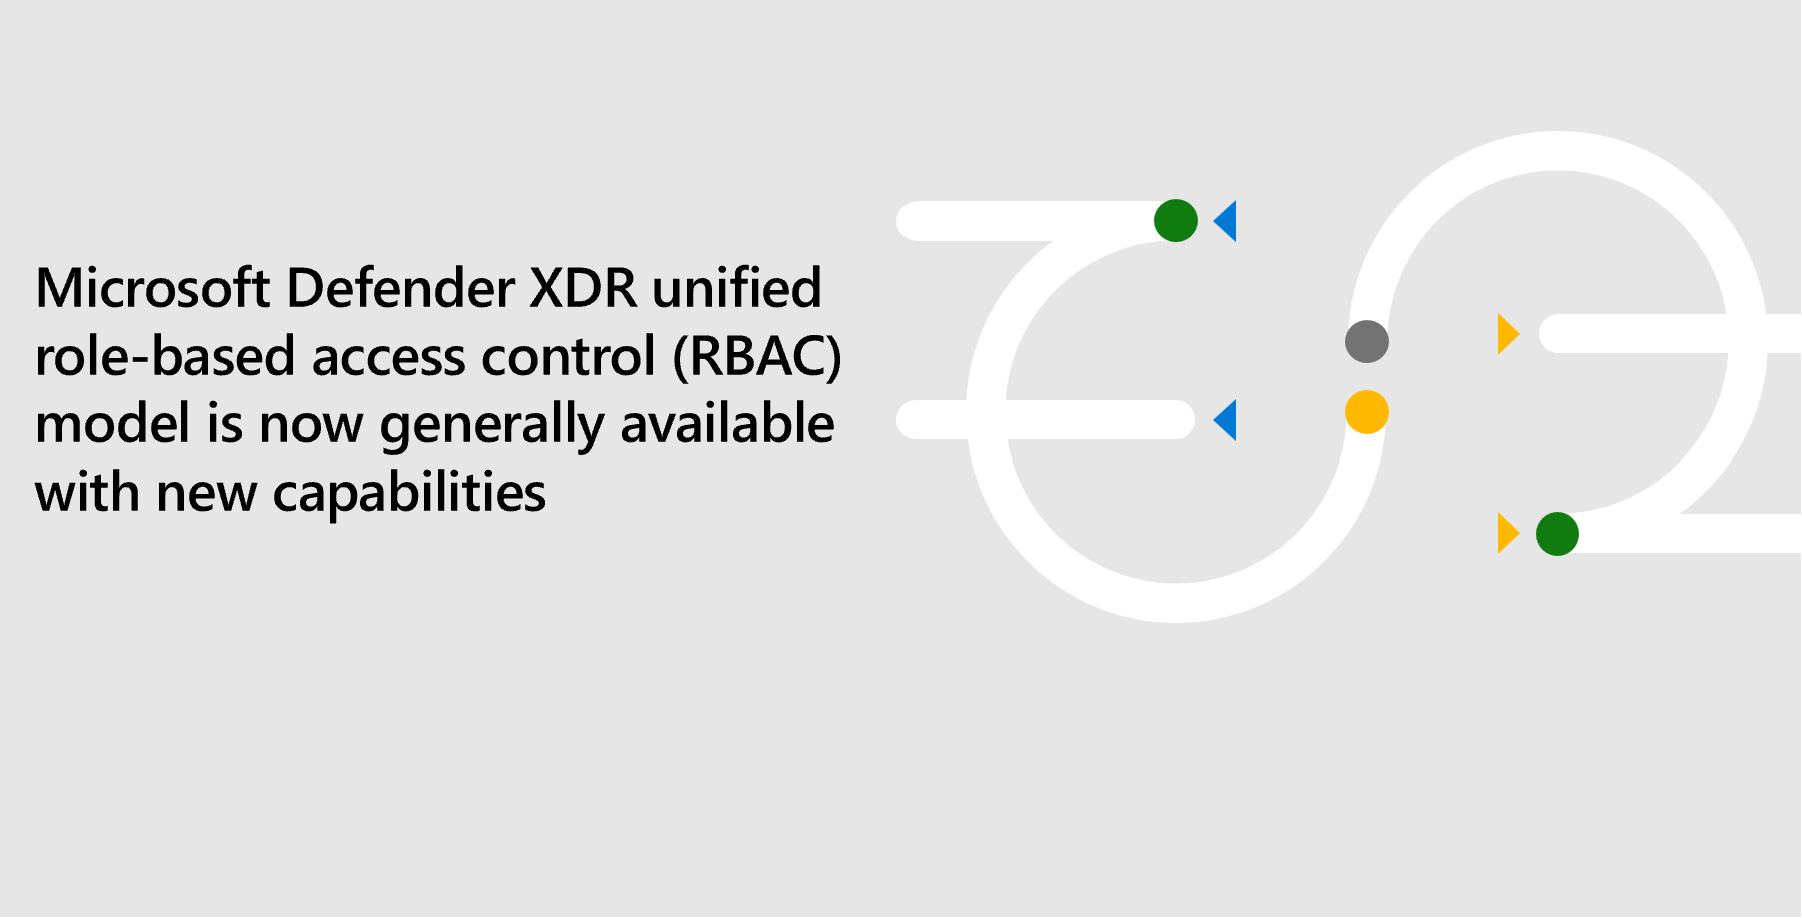 Microsoft Defender XDR unified role-based access control (RBAC) model is now generally available